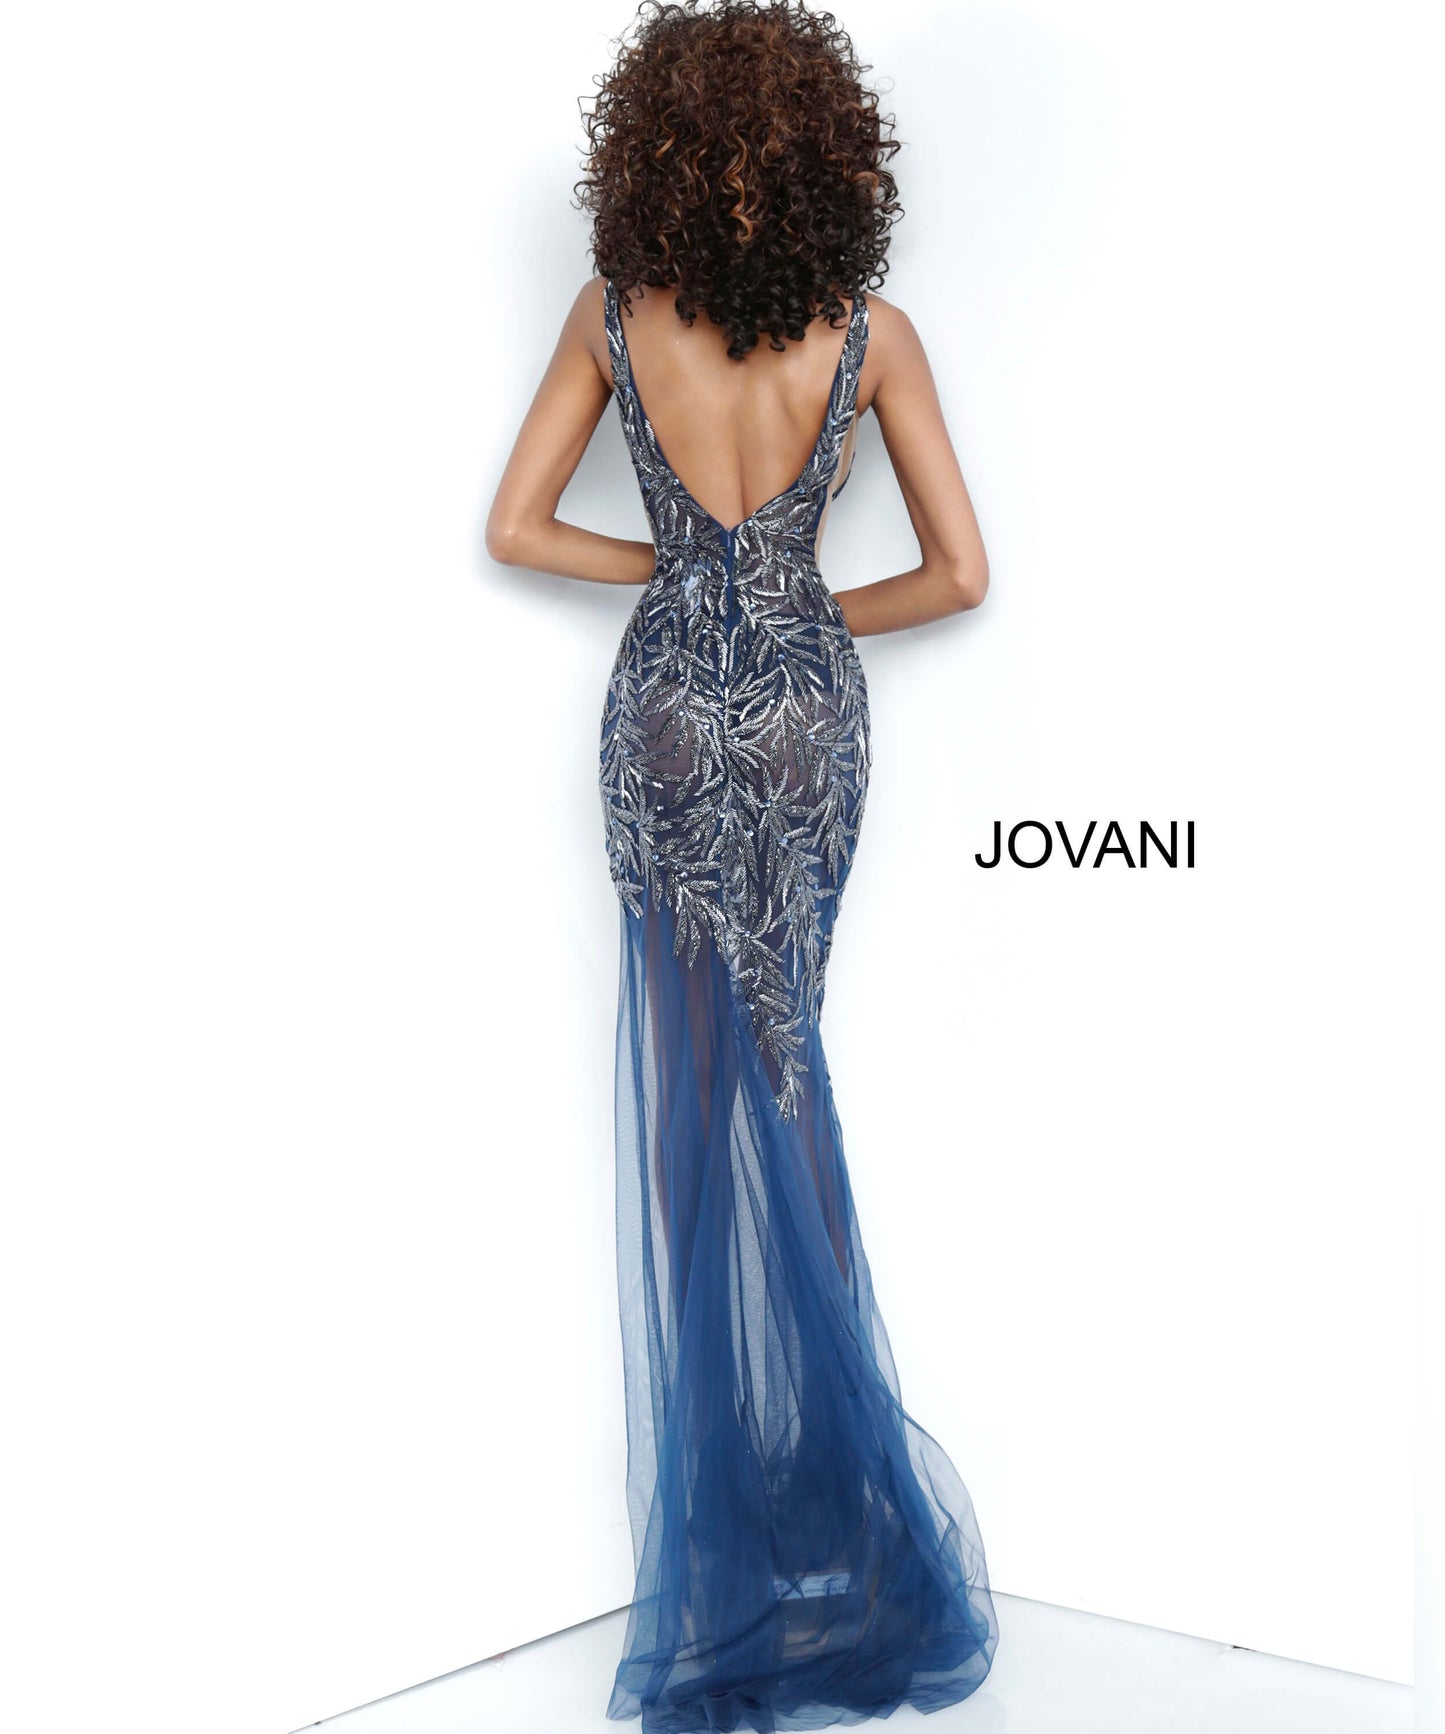 Jovani 1863 is a Gorgeous sheer Fully embellished Plunging Deep v neckline prom dress & Formal evening gown with slit in the sheer column skirt. Fully Embellished Crystal accented beaded sheer fitted bodice. Sheer side panels with mesh inserts.   Available colors:  Navy, Red, Silver/Nude, White  Available sizes:  00-24 